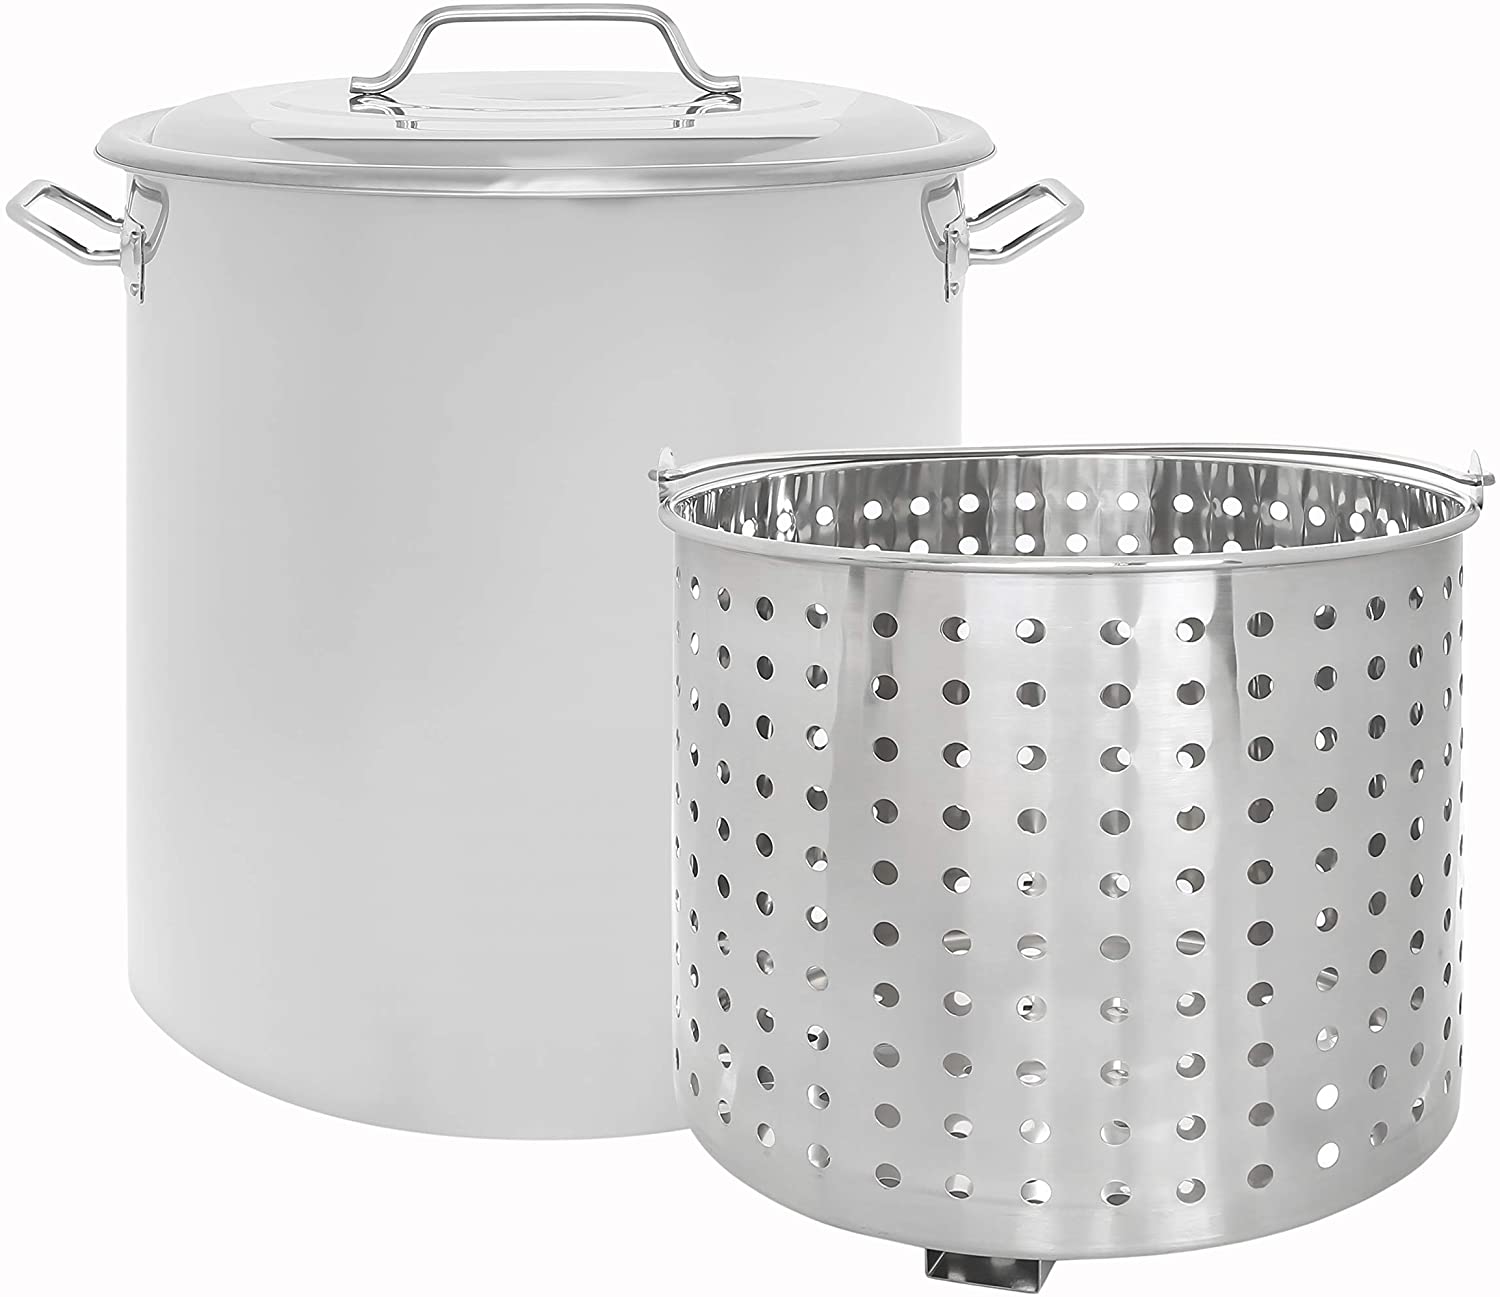 Concord CONCORD 10 Stainless Steel 3 Tier Steamer Steaming Pot